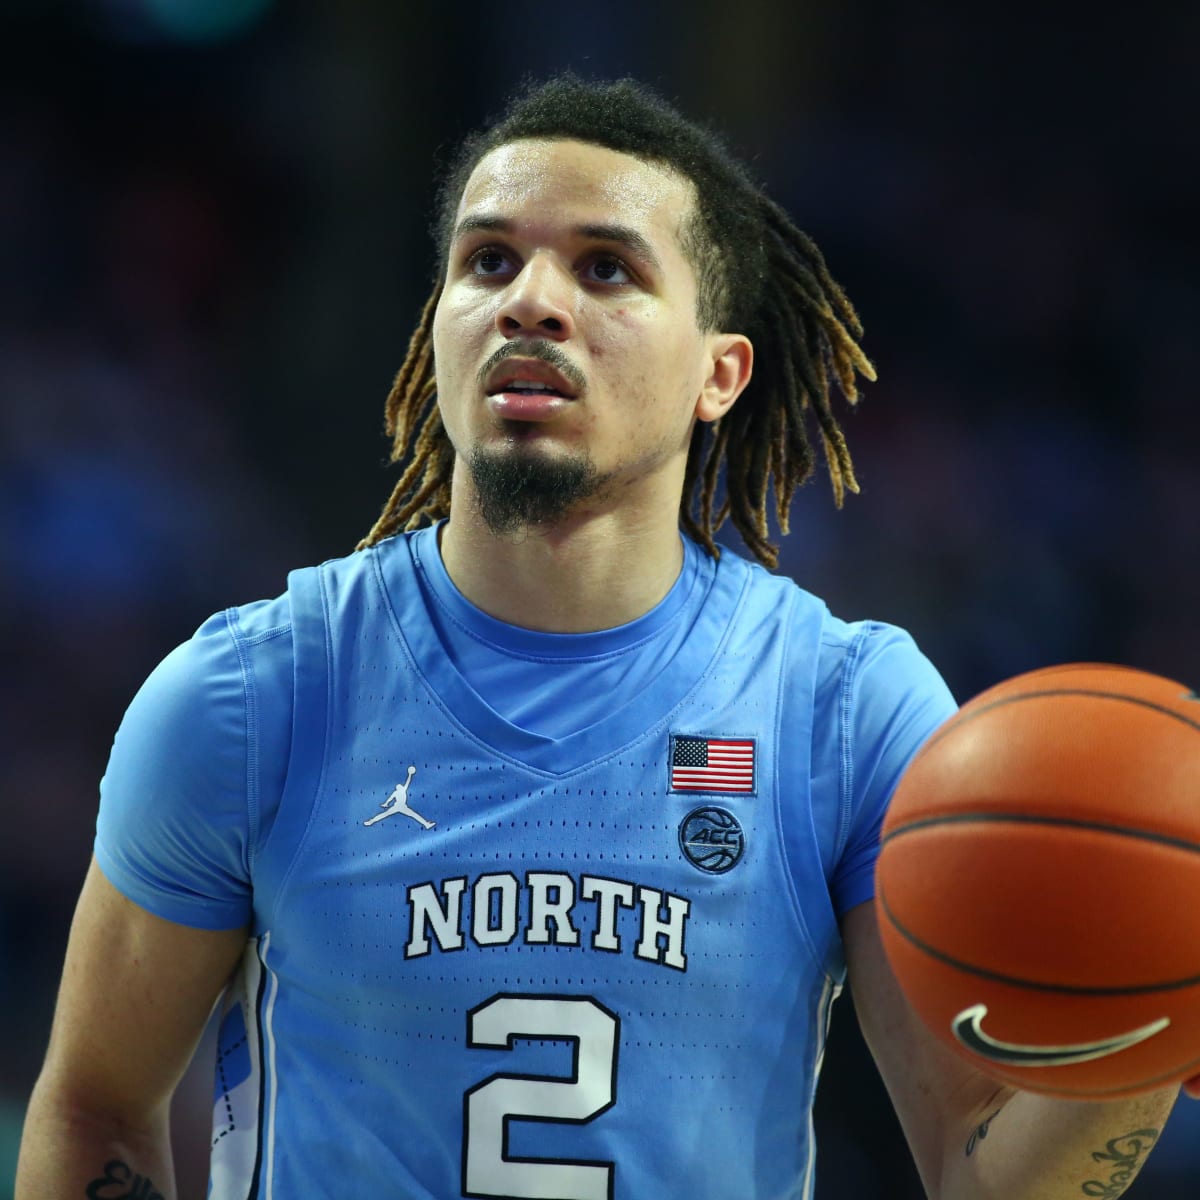 cole anthony jersey unc